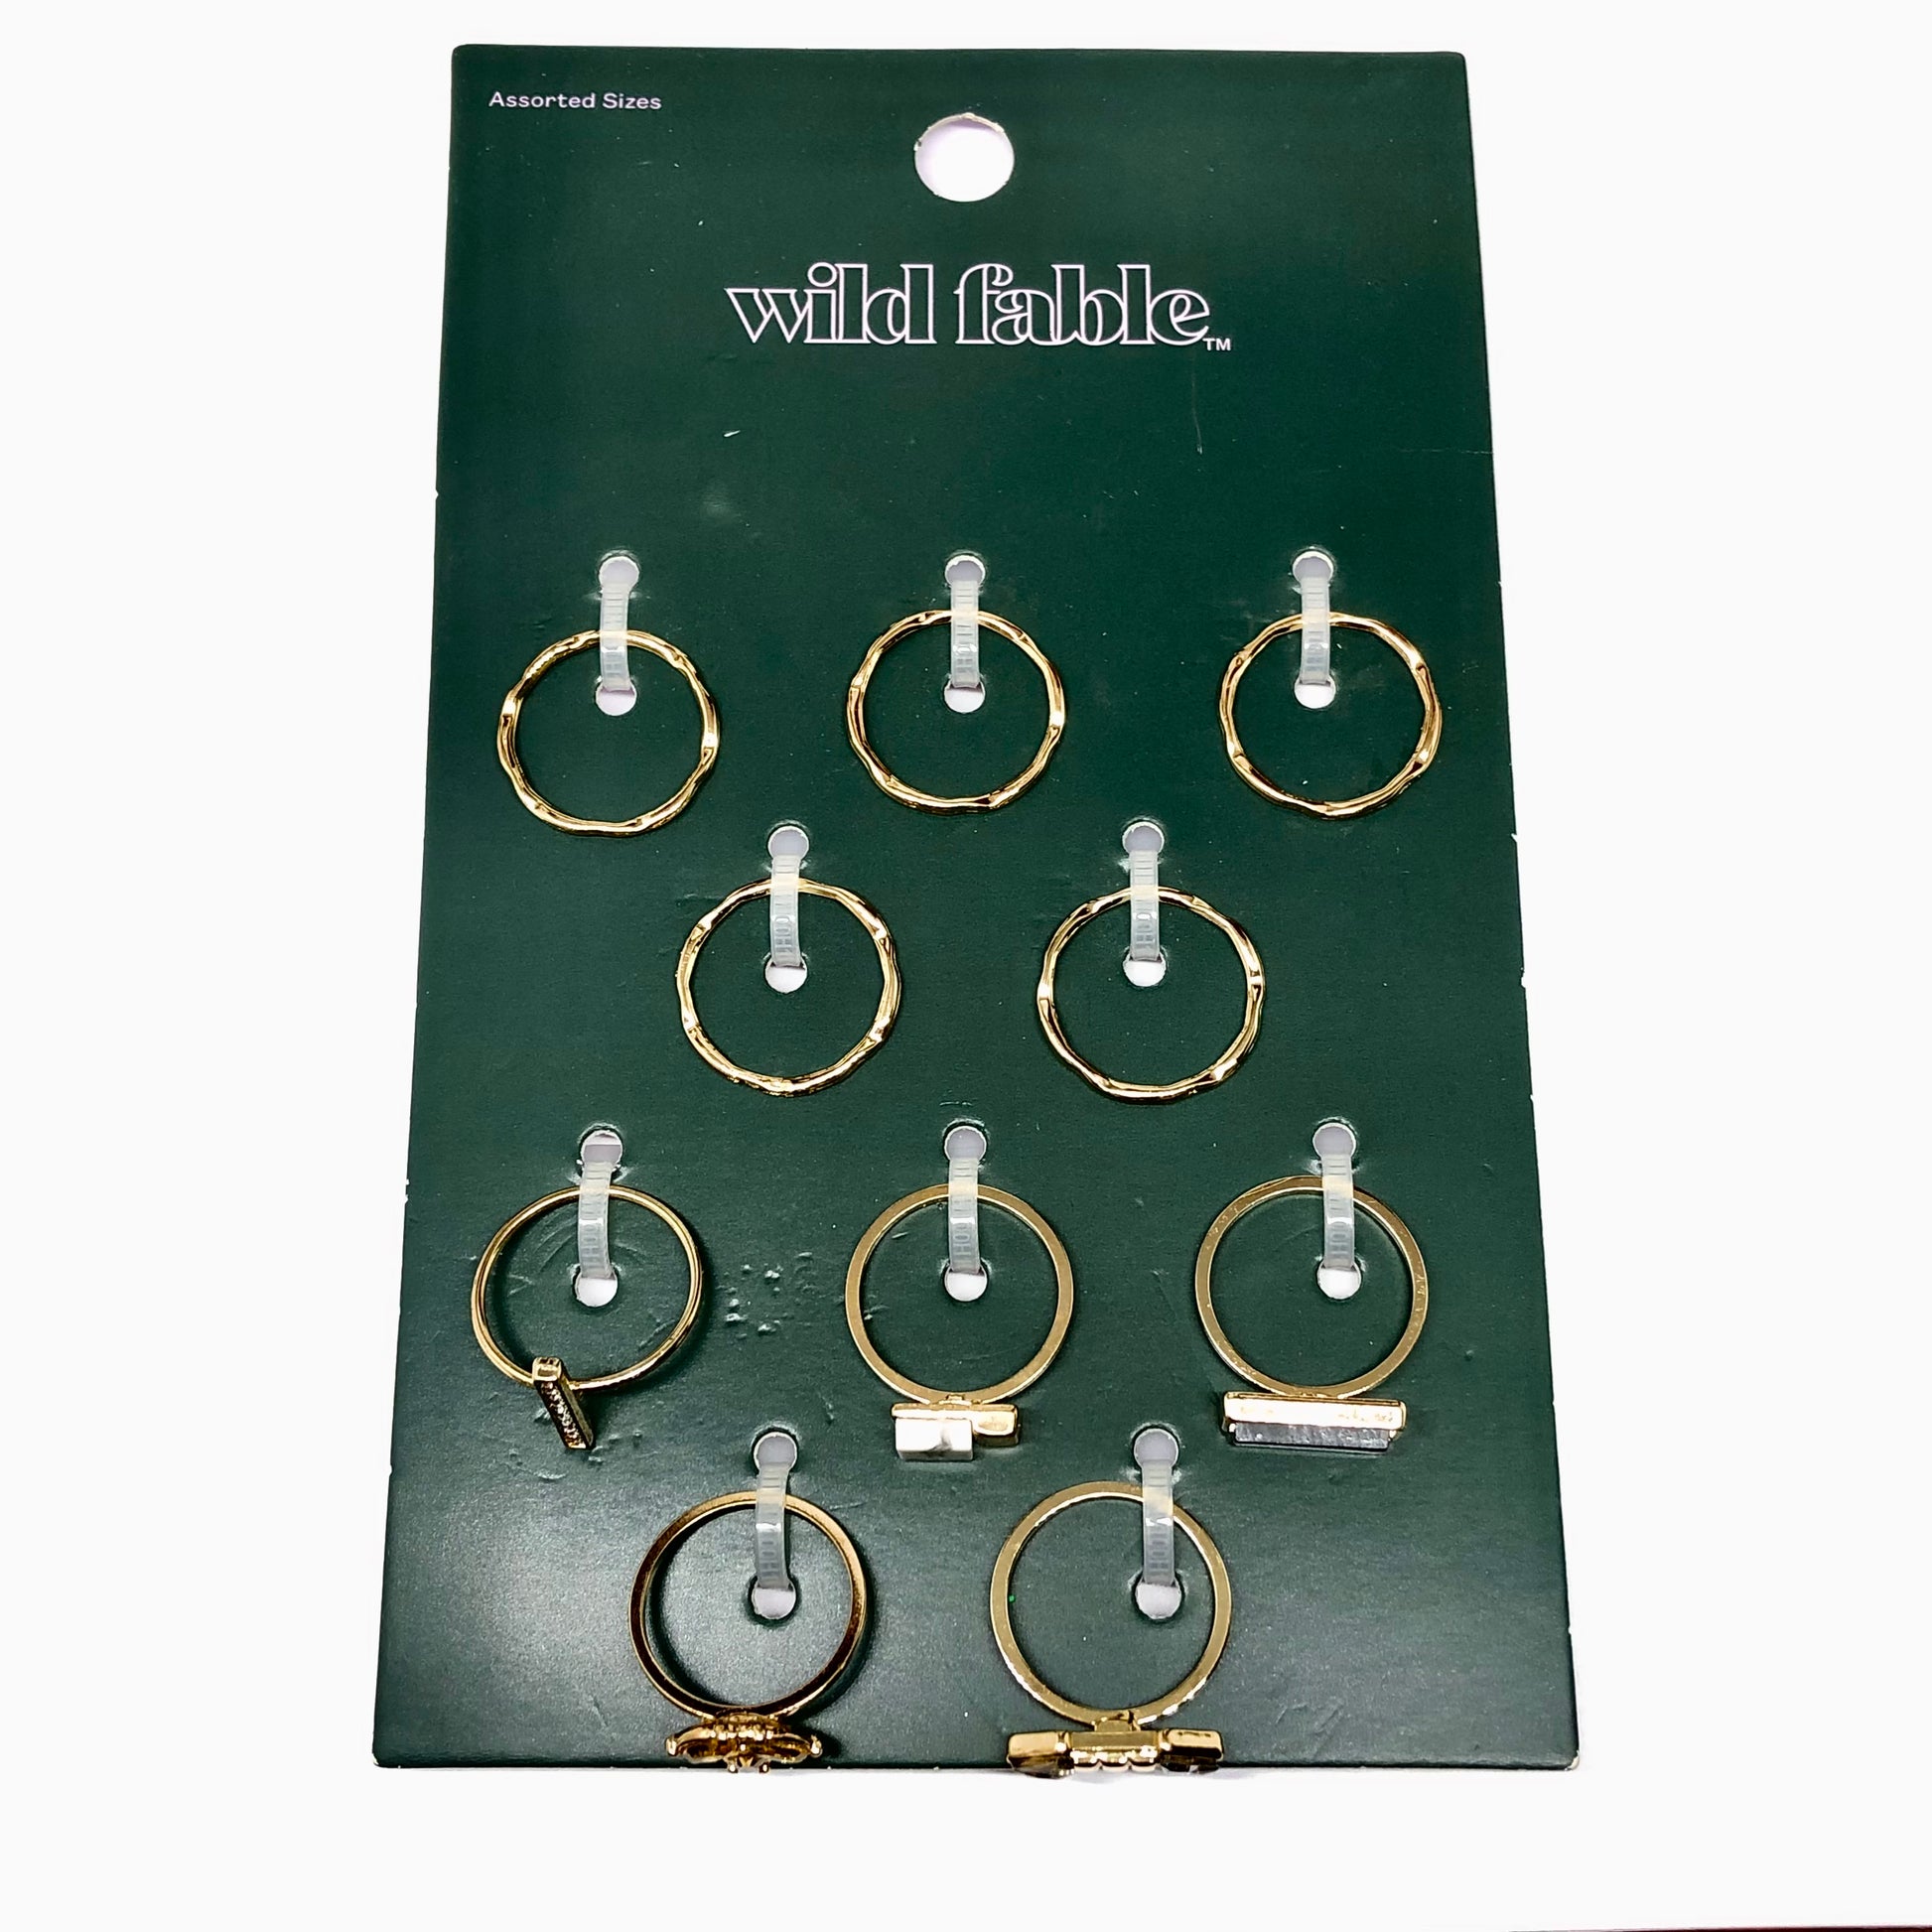 Signent Ring Set 10pc - Wild Fable™ Gold 4/8/7